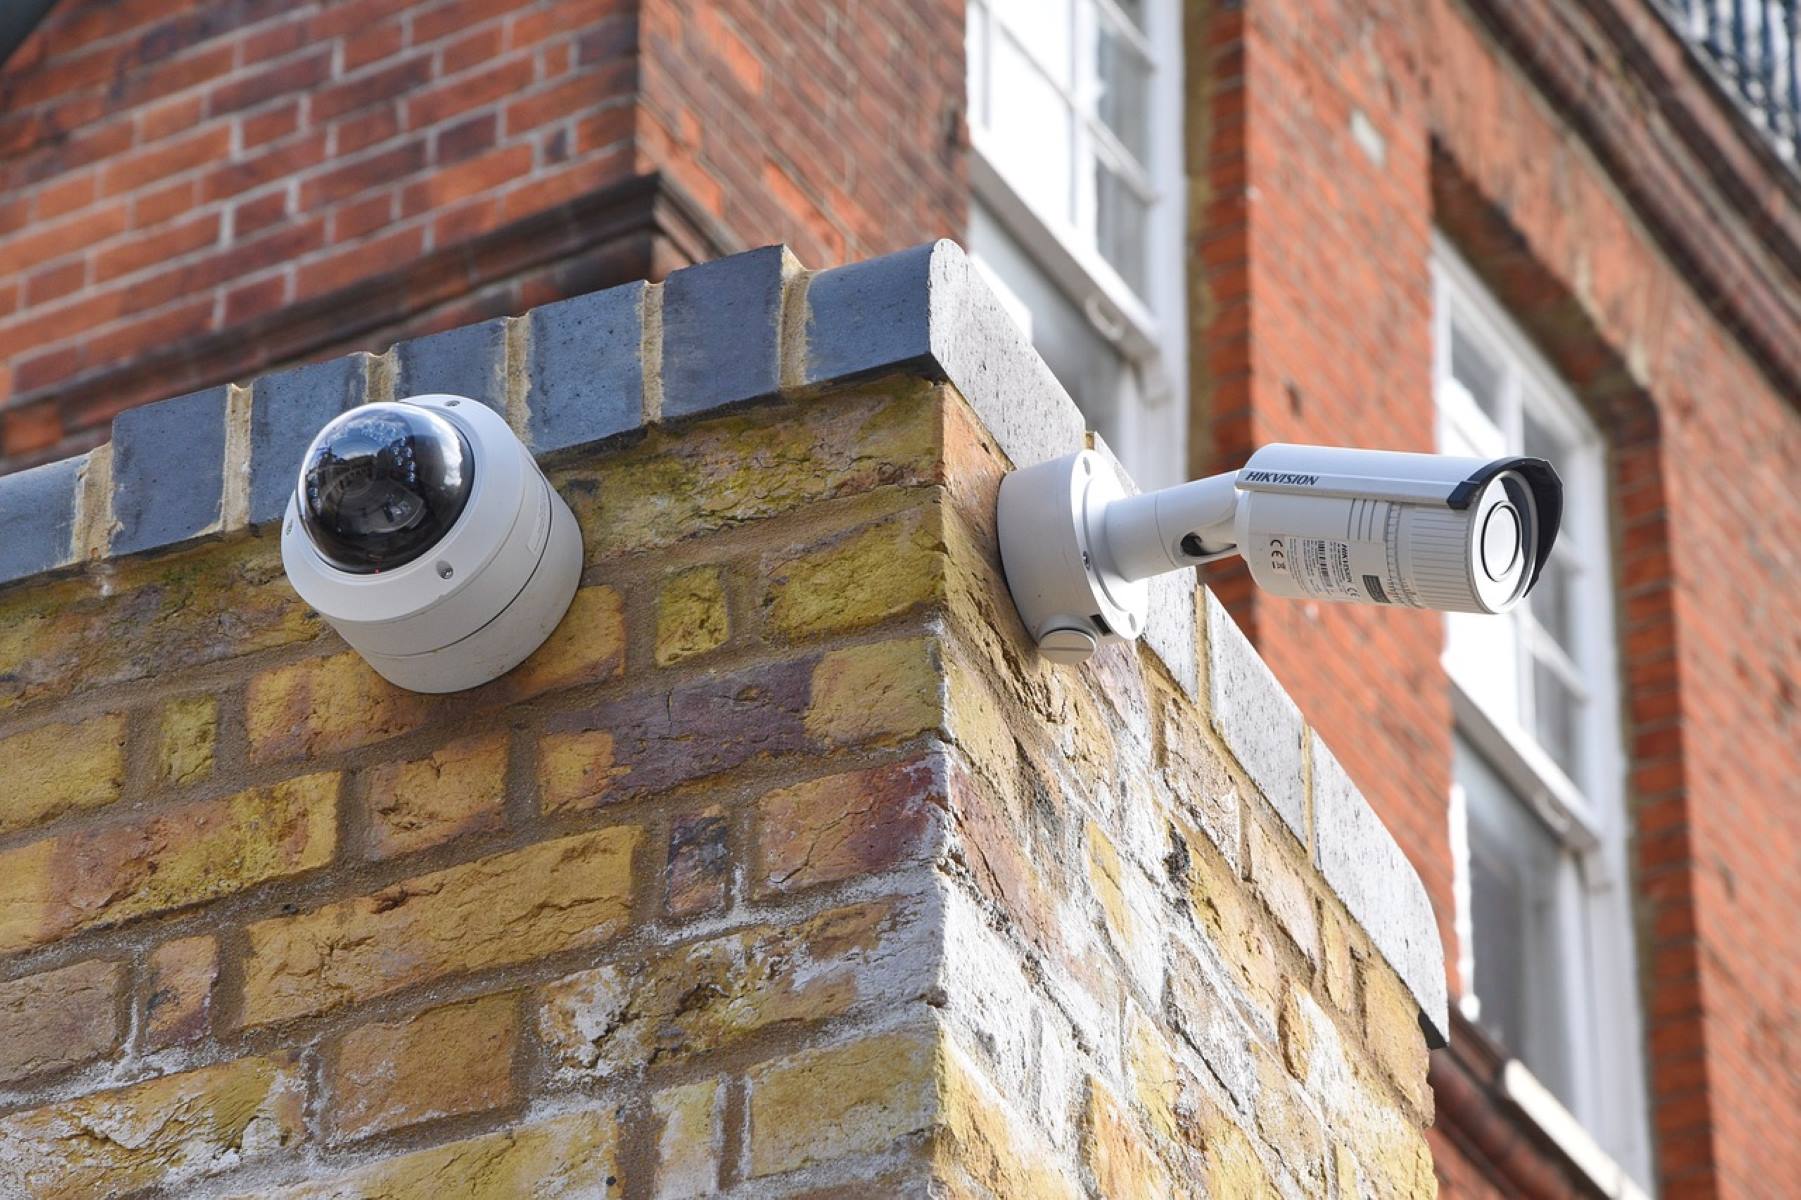 Where To Position CCTV Cameras At Home